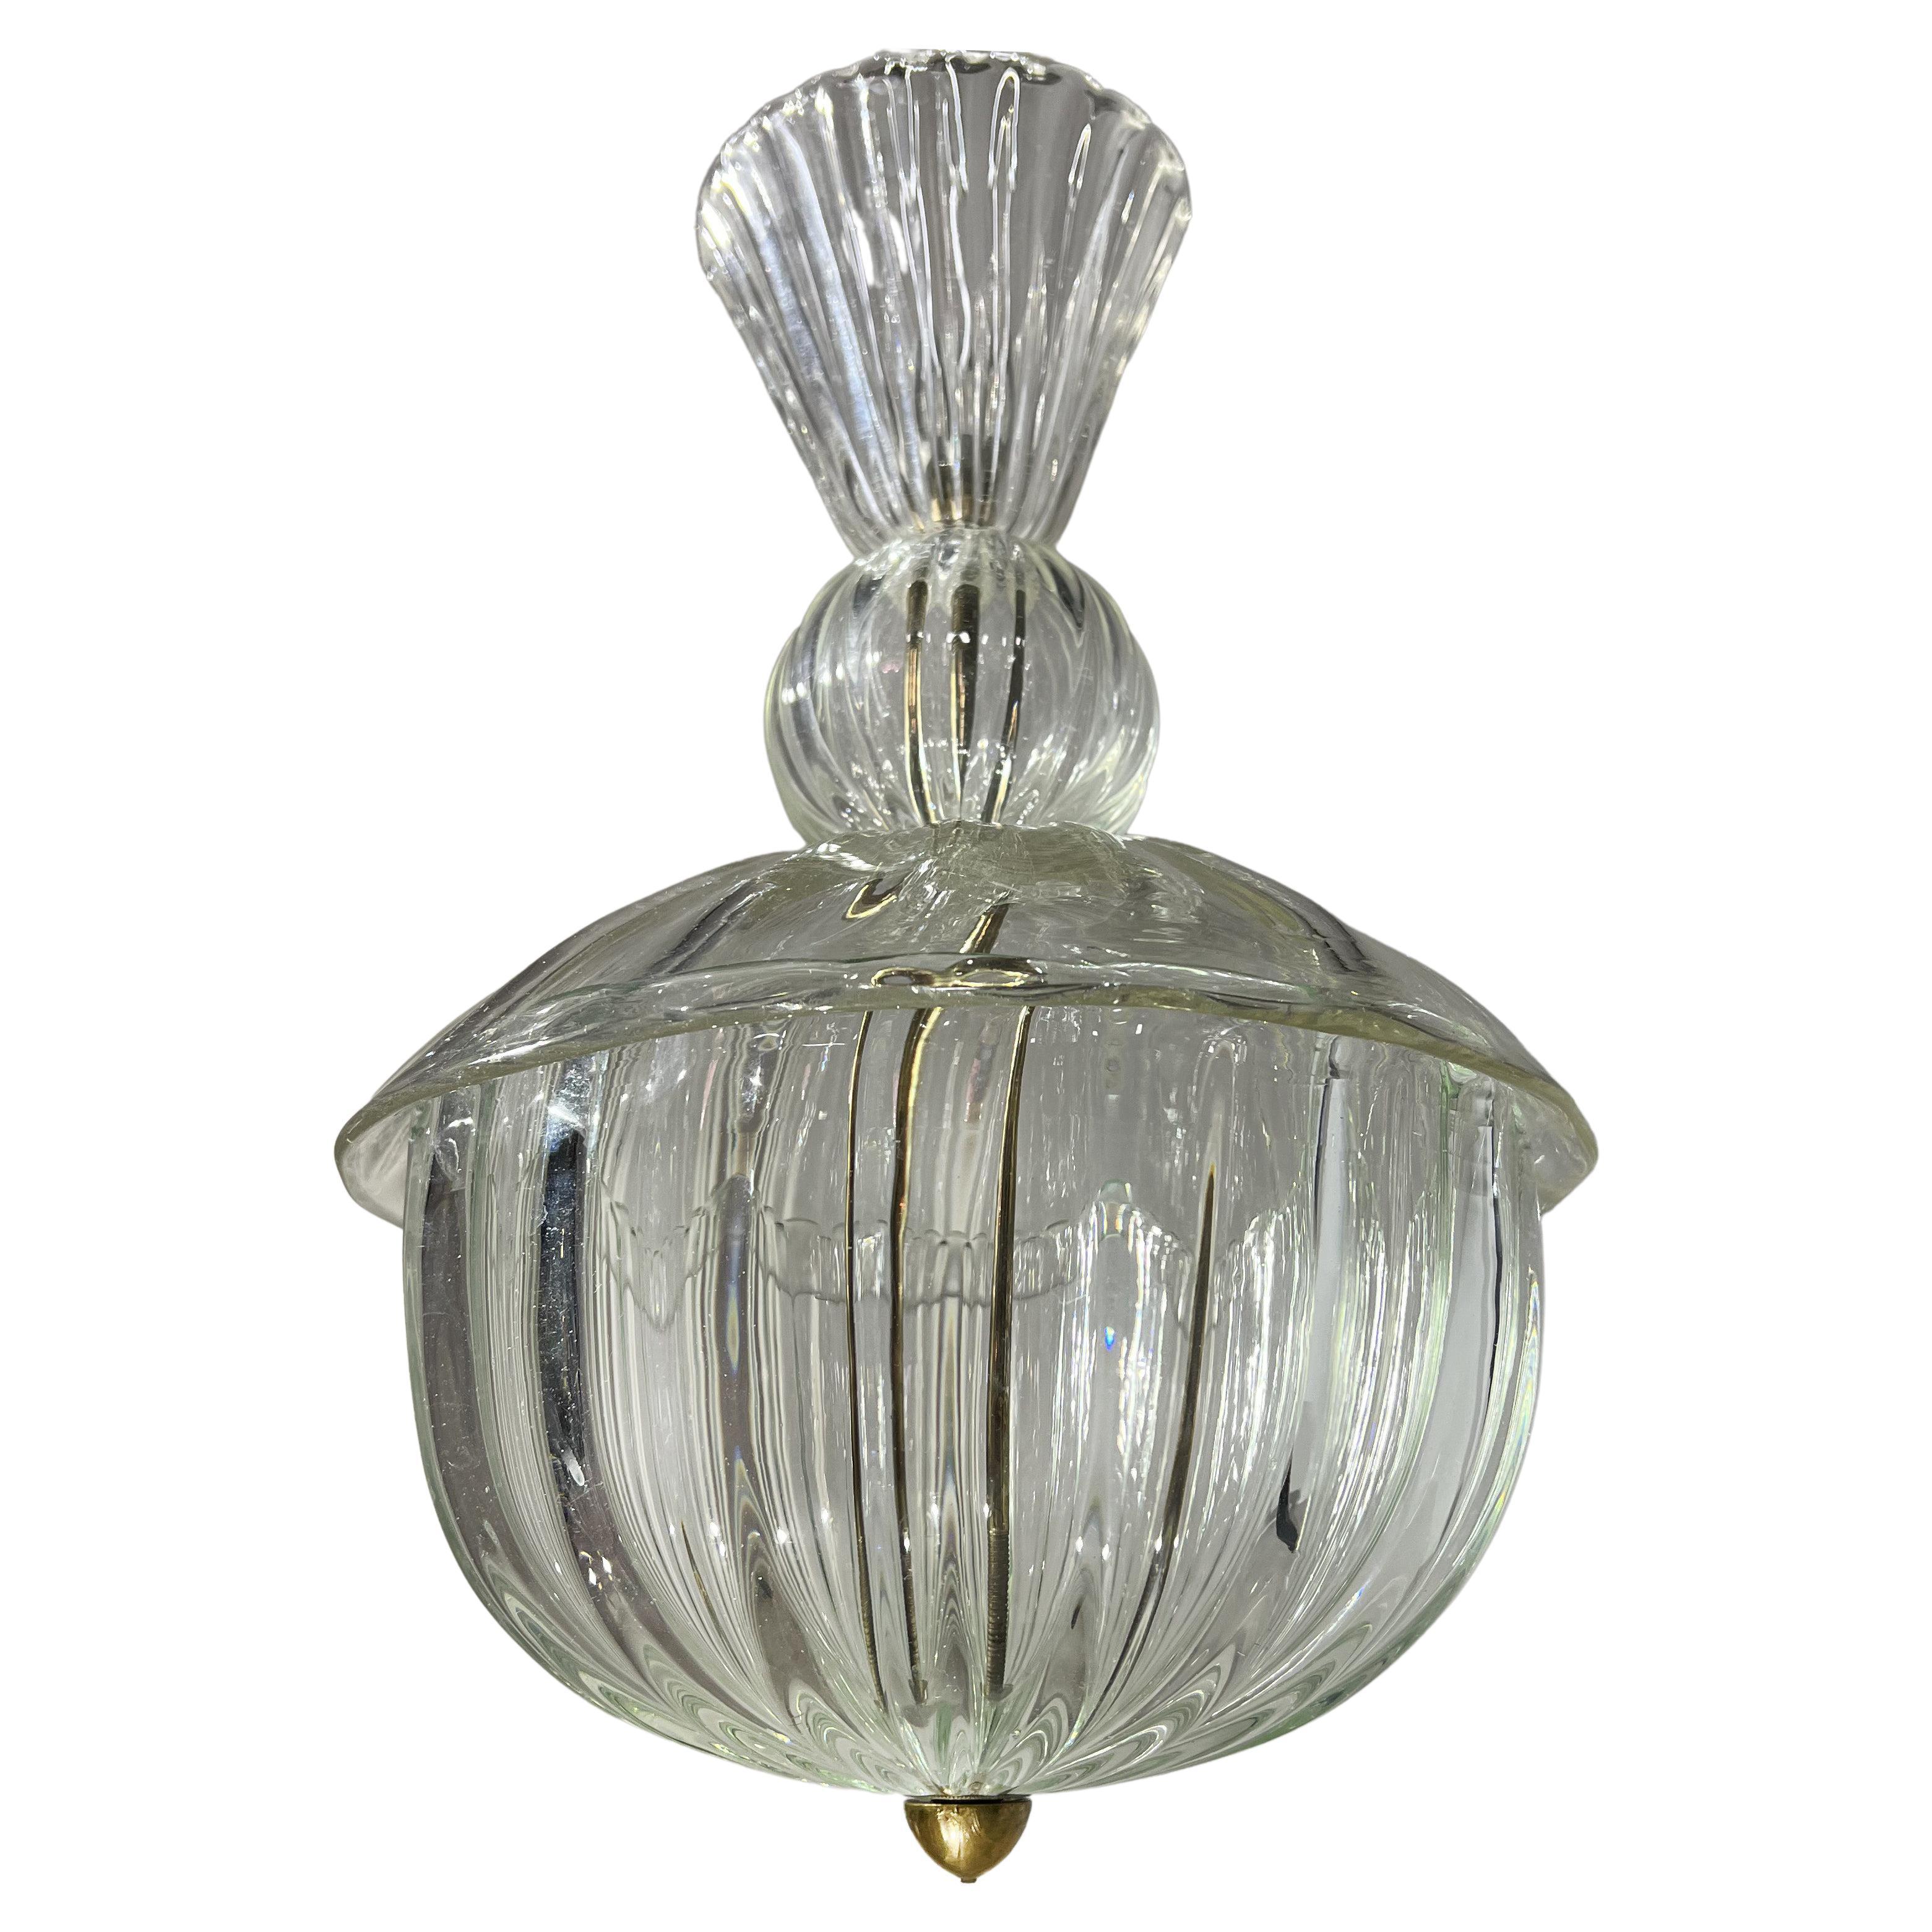 Art Deco Chandelier "The Prince" by Ercole Barovier, Murano, 1940s For Sale